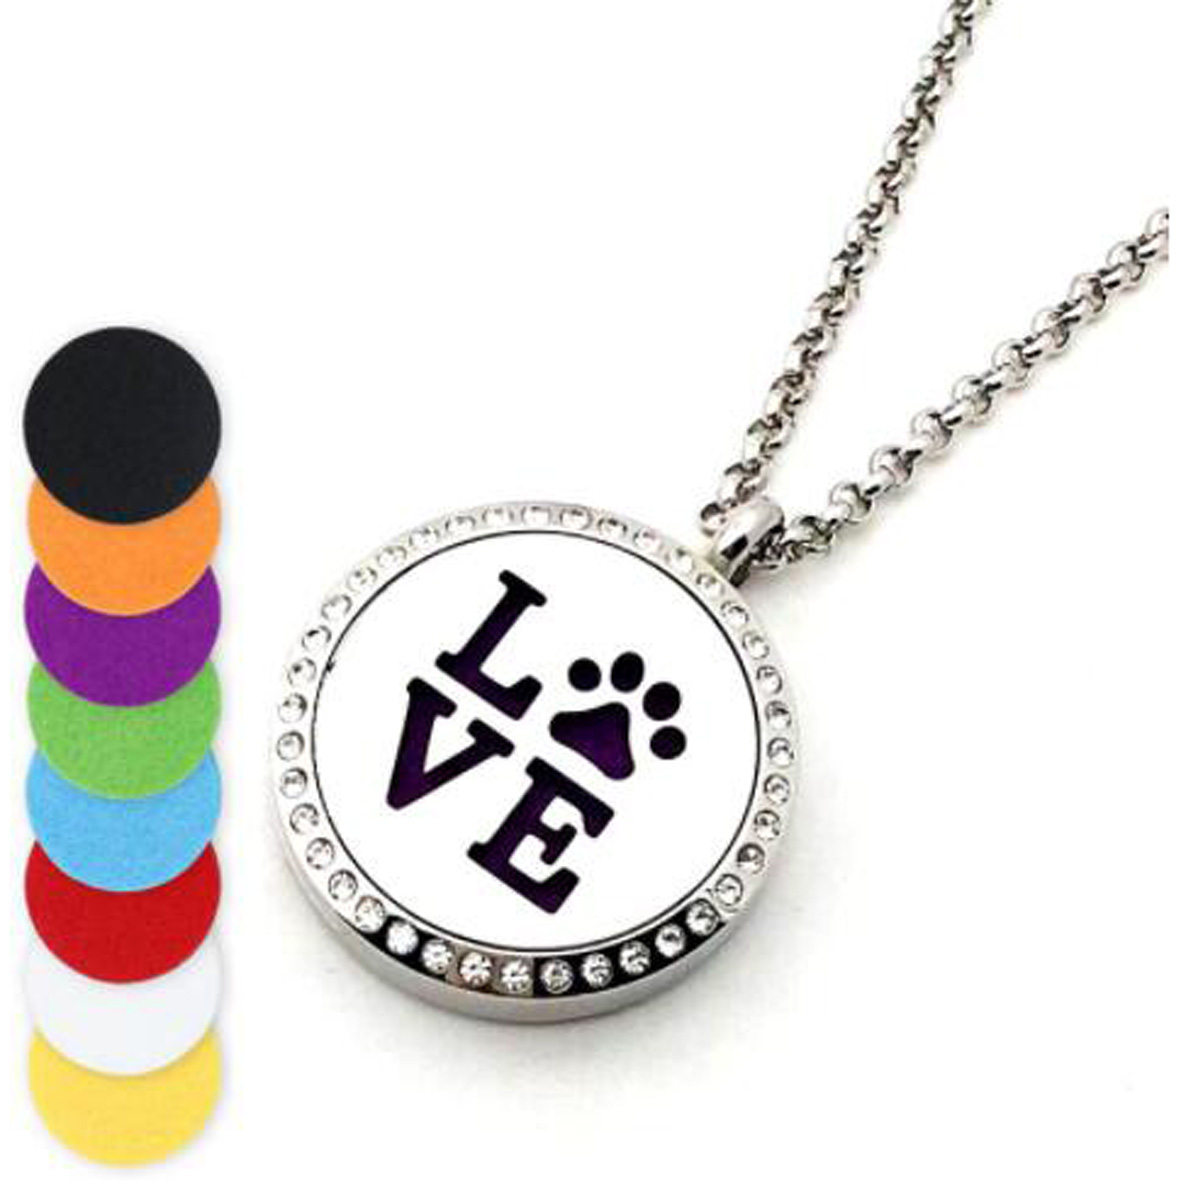 GL-ELY1076 Oil Diffuser Necklace